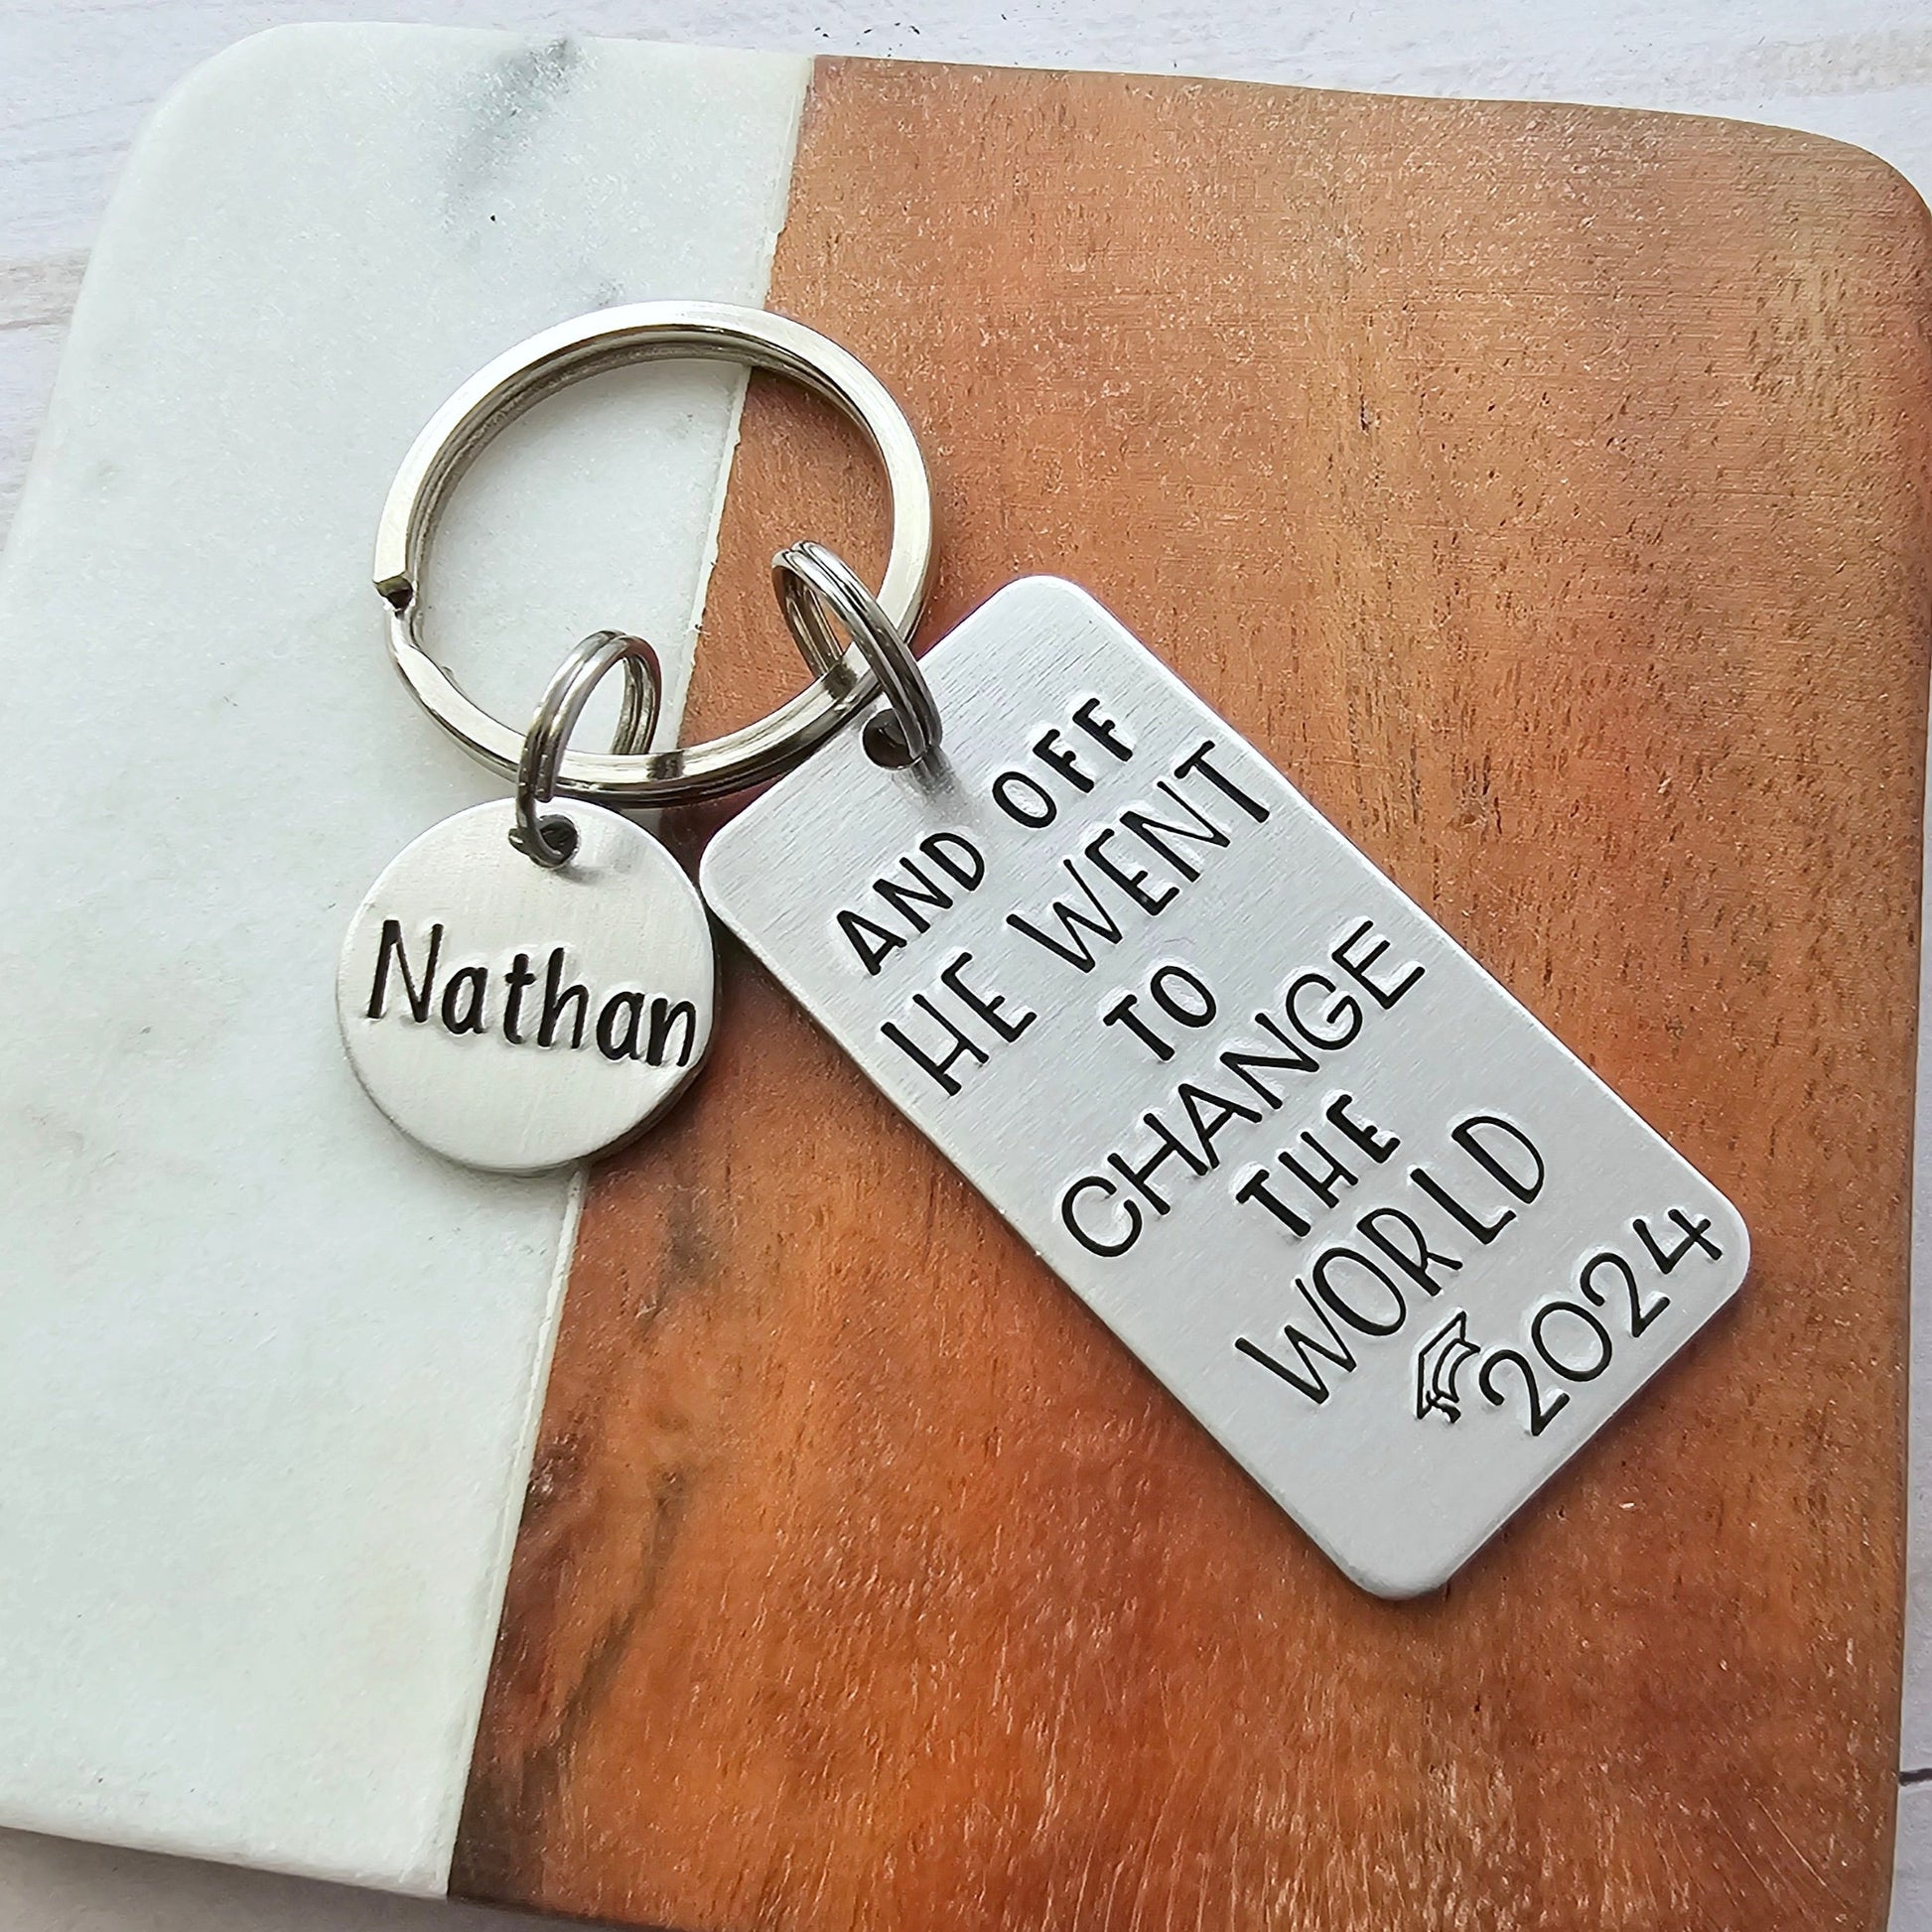 Silver handstamped keychain that reads And off he went to change the world with the year 2024 and a grad cap. It also shows an optional round add on charm with a name of your choice. The hand stamped tag is a large rectangle.